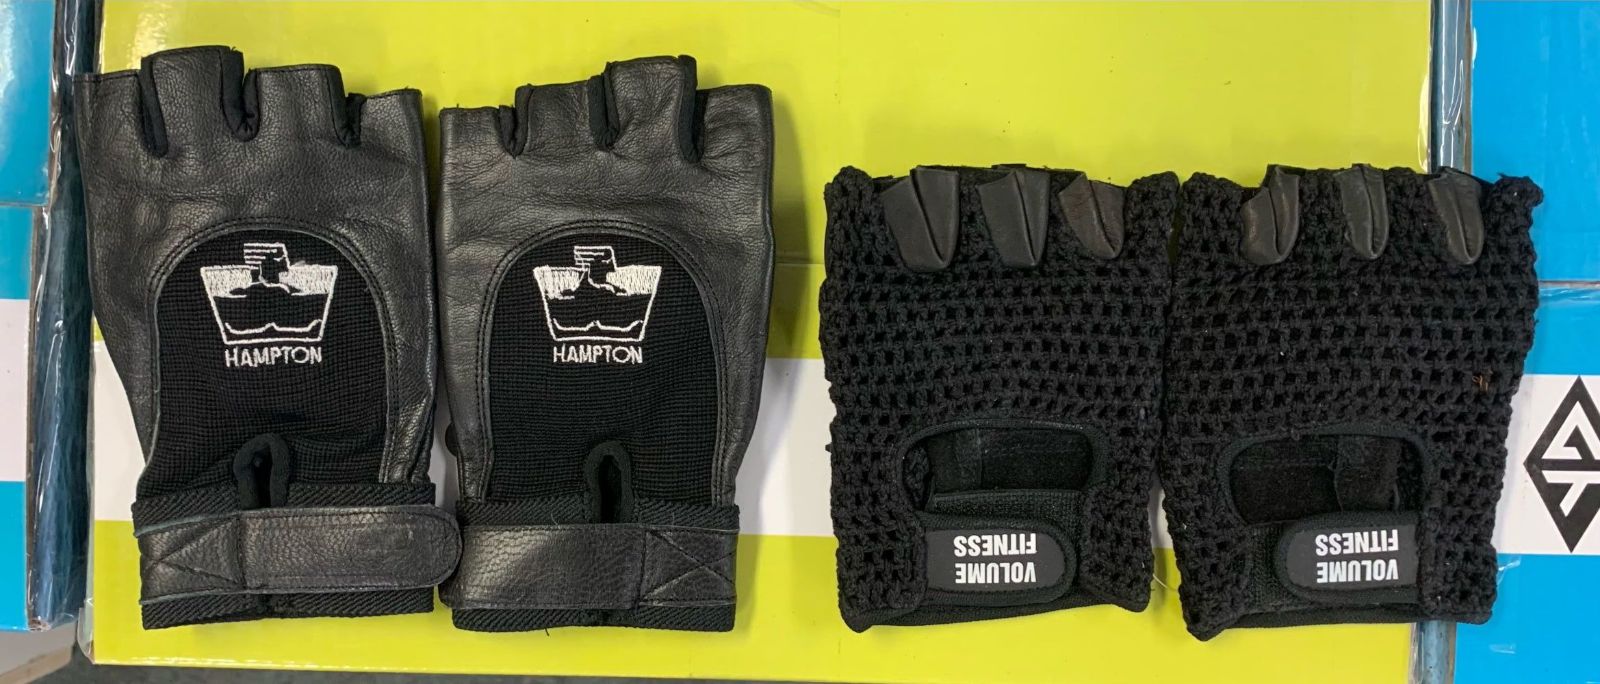 Lifting Gloves, Strength Equipment, Strength / Weight Accessories, Exercising / Weight Lifting Gloves, Great Life Fitness, Buy Fitness  Equipment, Gym Accessories Online